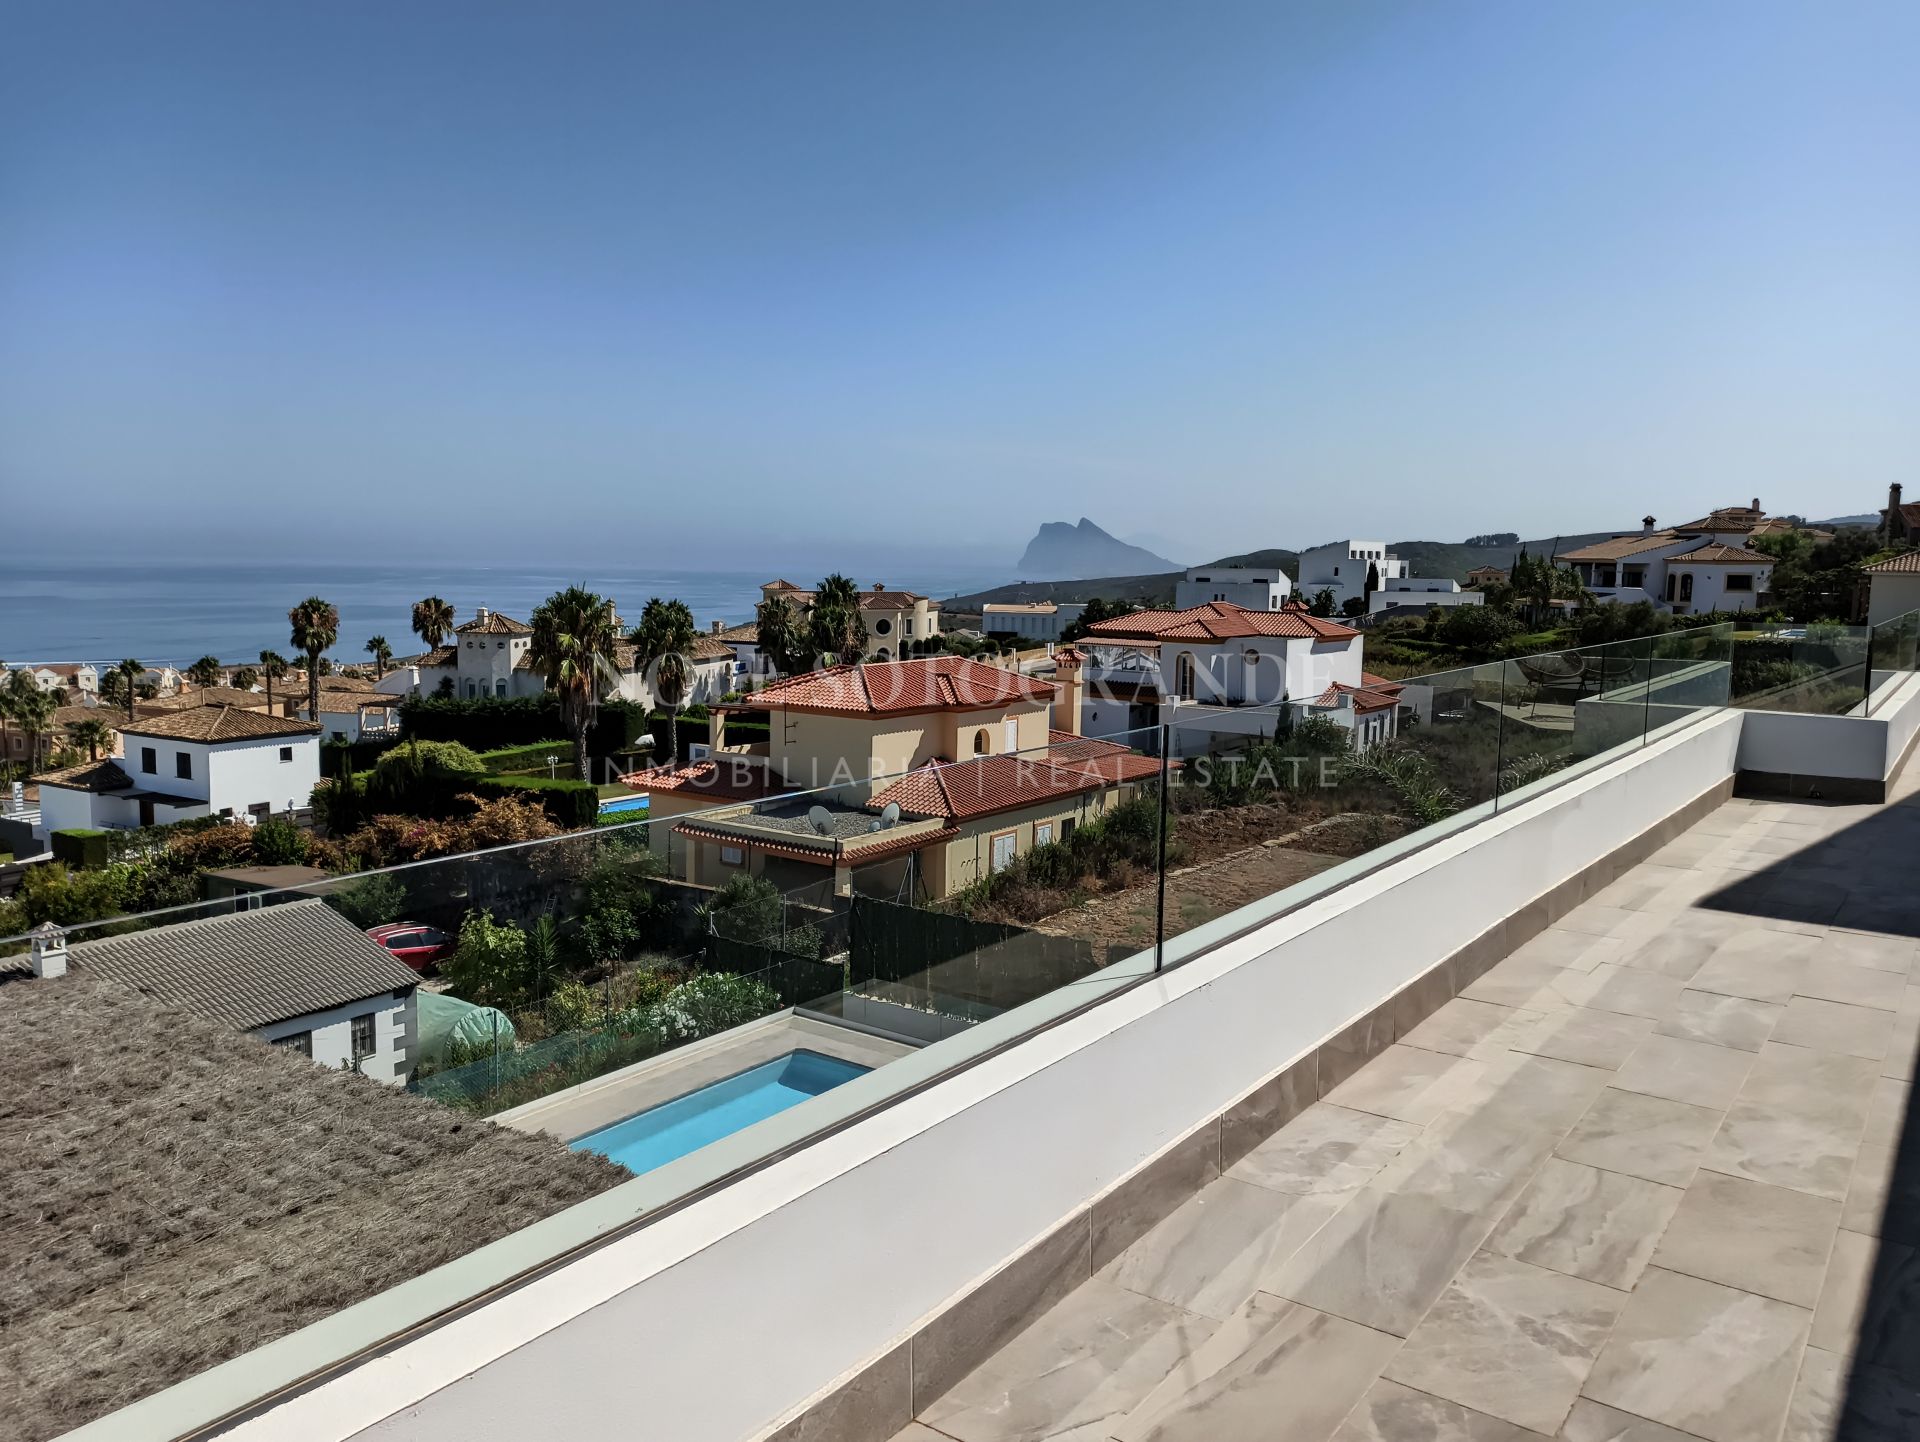 Villa with spectacular views for rent in Alcaidesa